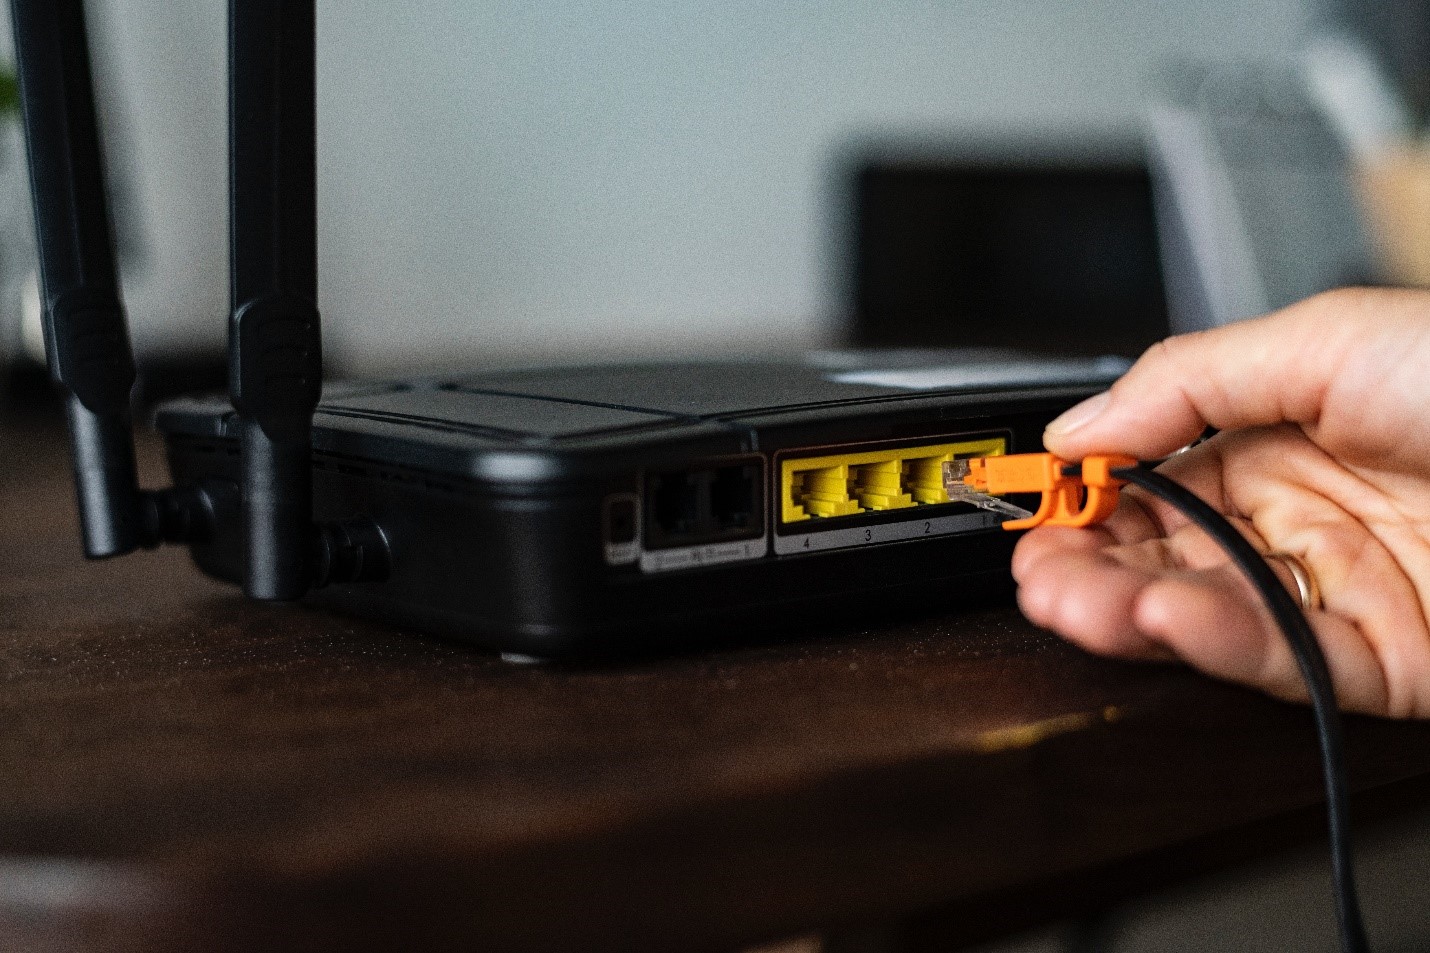 How to Protect Yourself with Home Networking Security